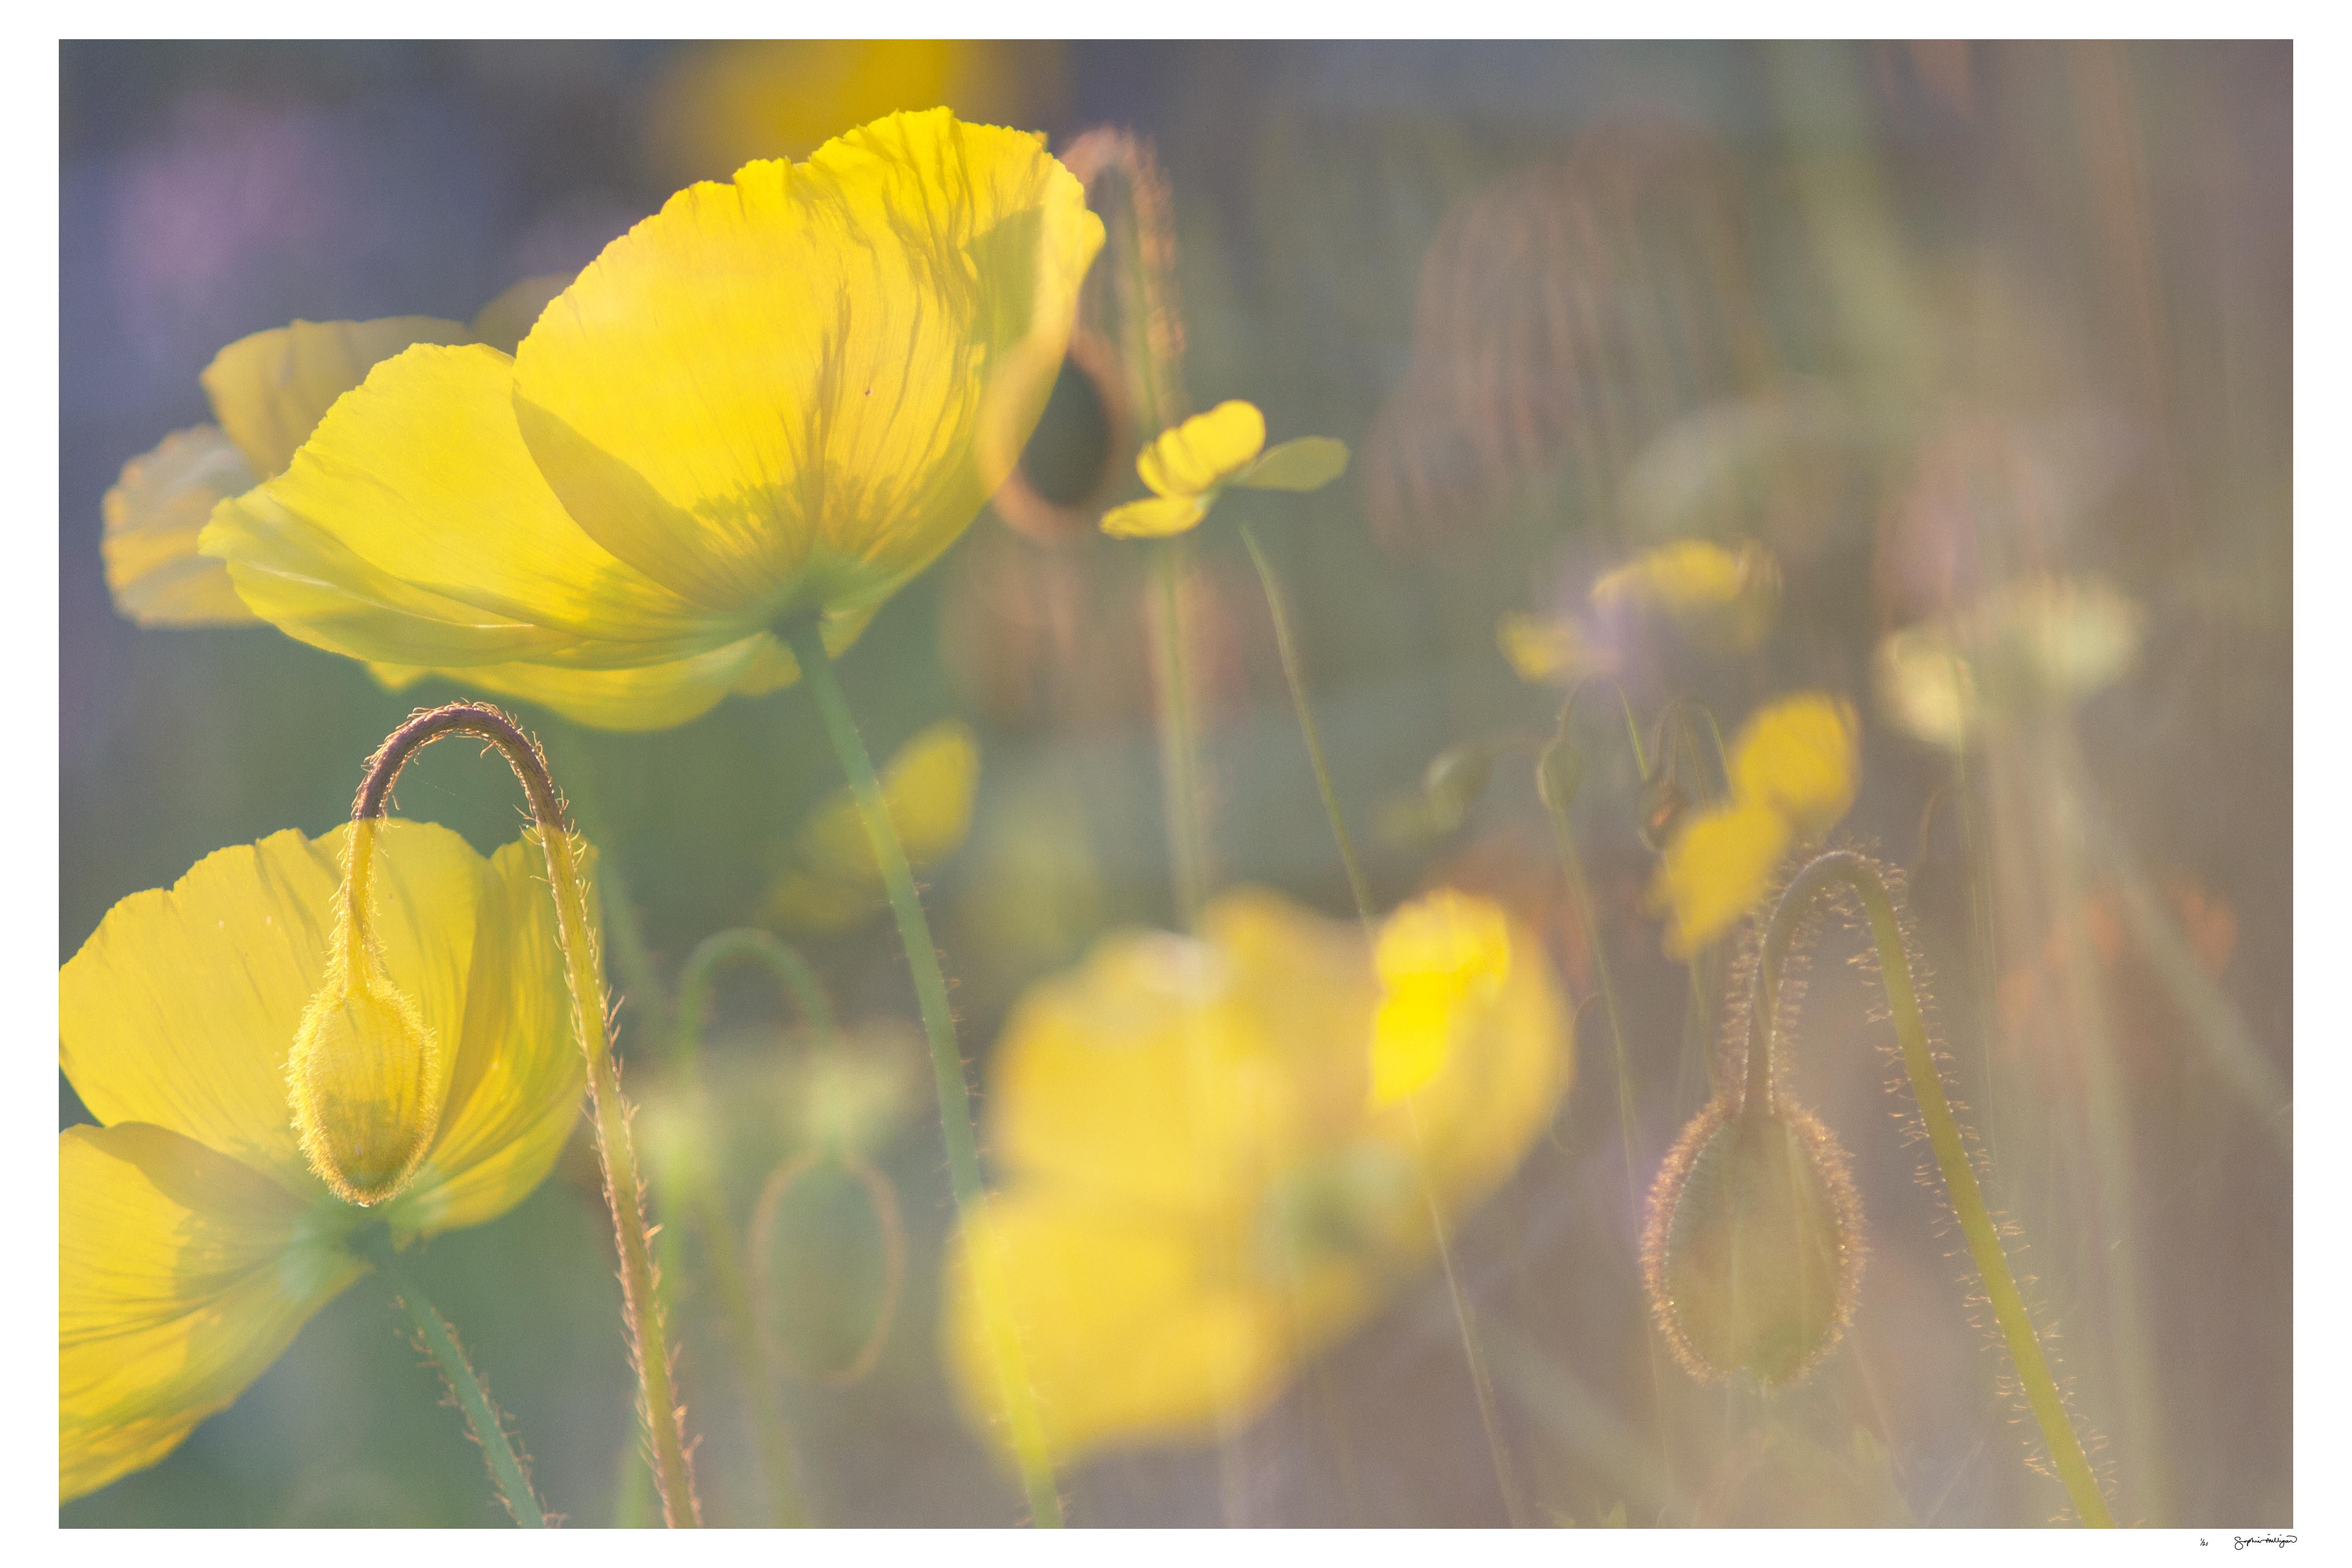 Sophia Milligan Color Photograph - 'Yellow Poppies' Large scale floral photo. Botanical yellow green